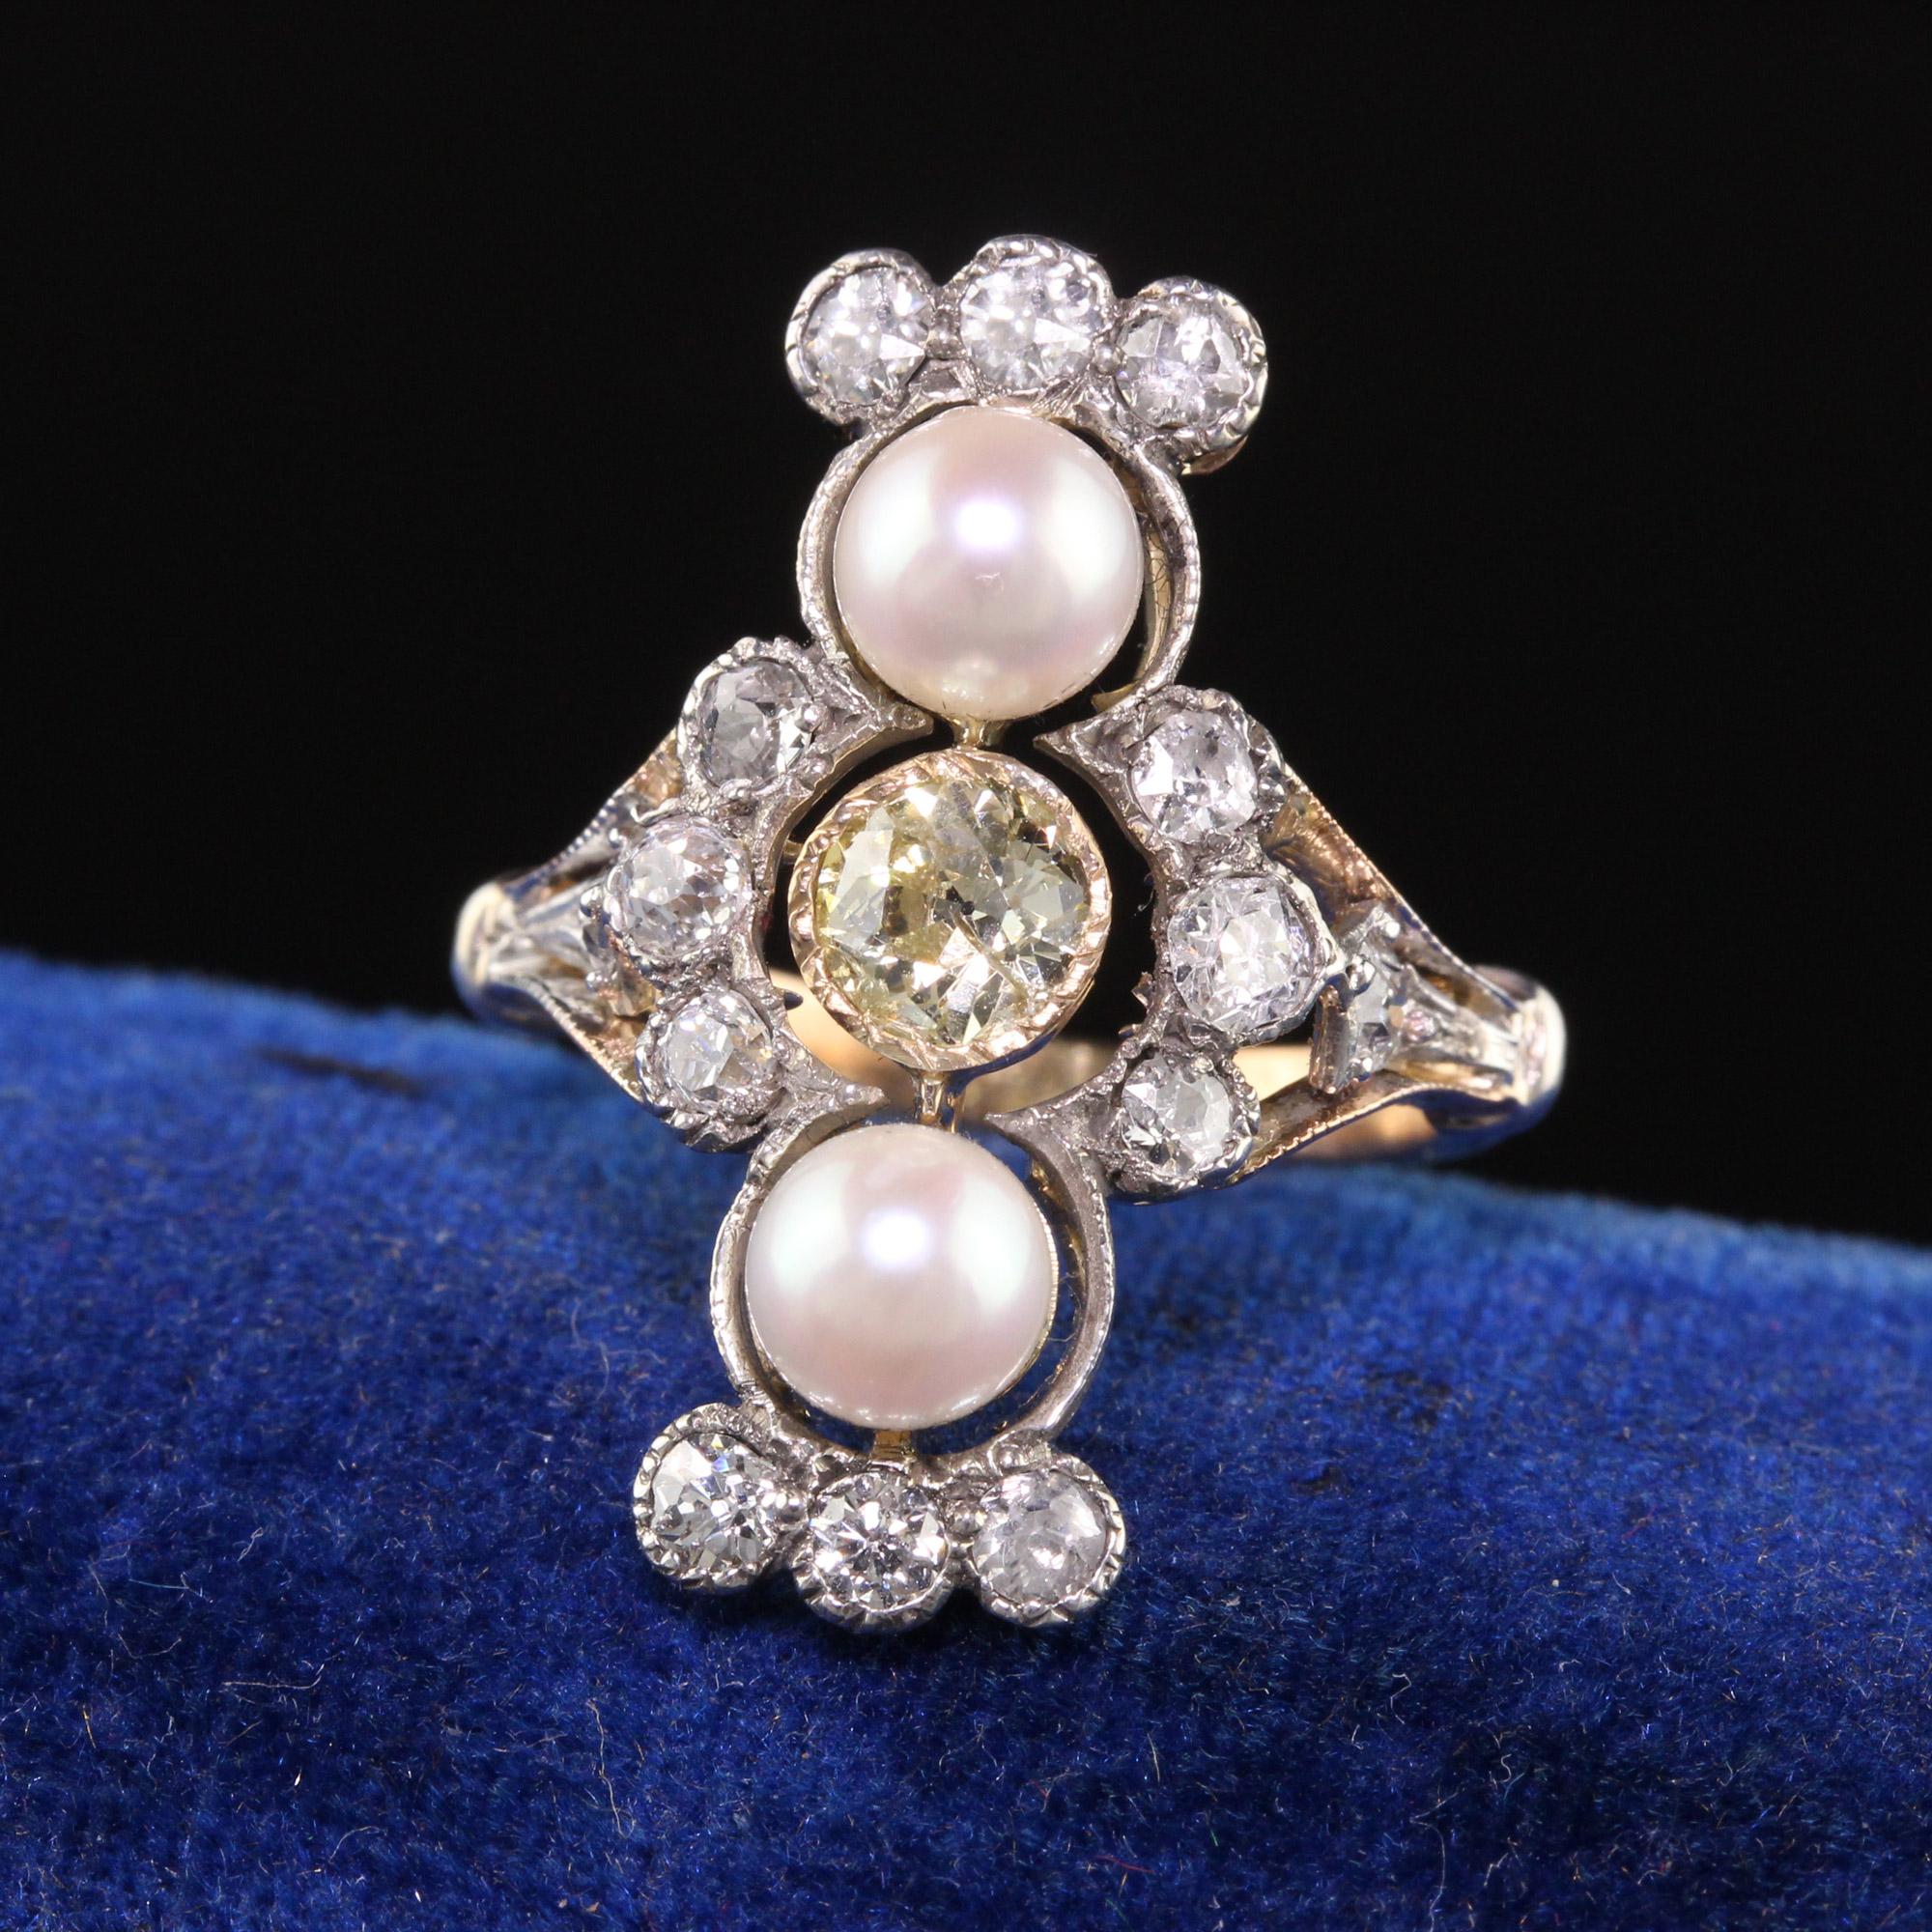 Beautiful Antique Victorian 18K Yellow Gold Old European Diamond and Pearl Shield Ring. This gorgeous ring is crafted in 18k yellow gold and silver top. There are old european cut diamonds set on the ring with a yellow old european cut in the